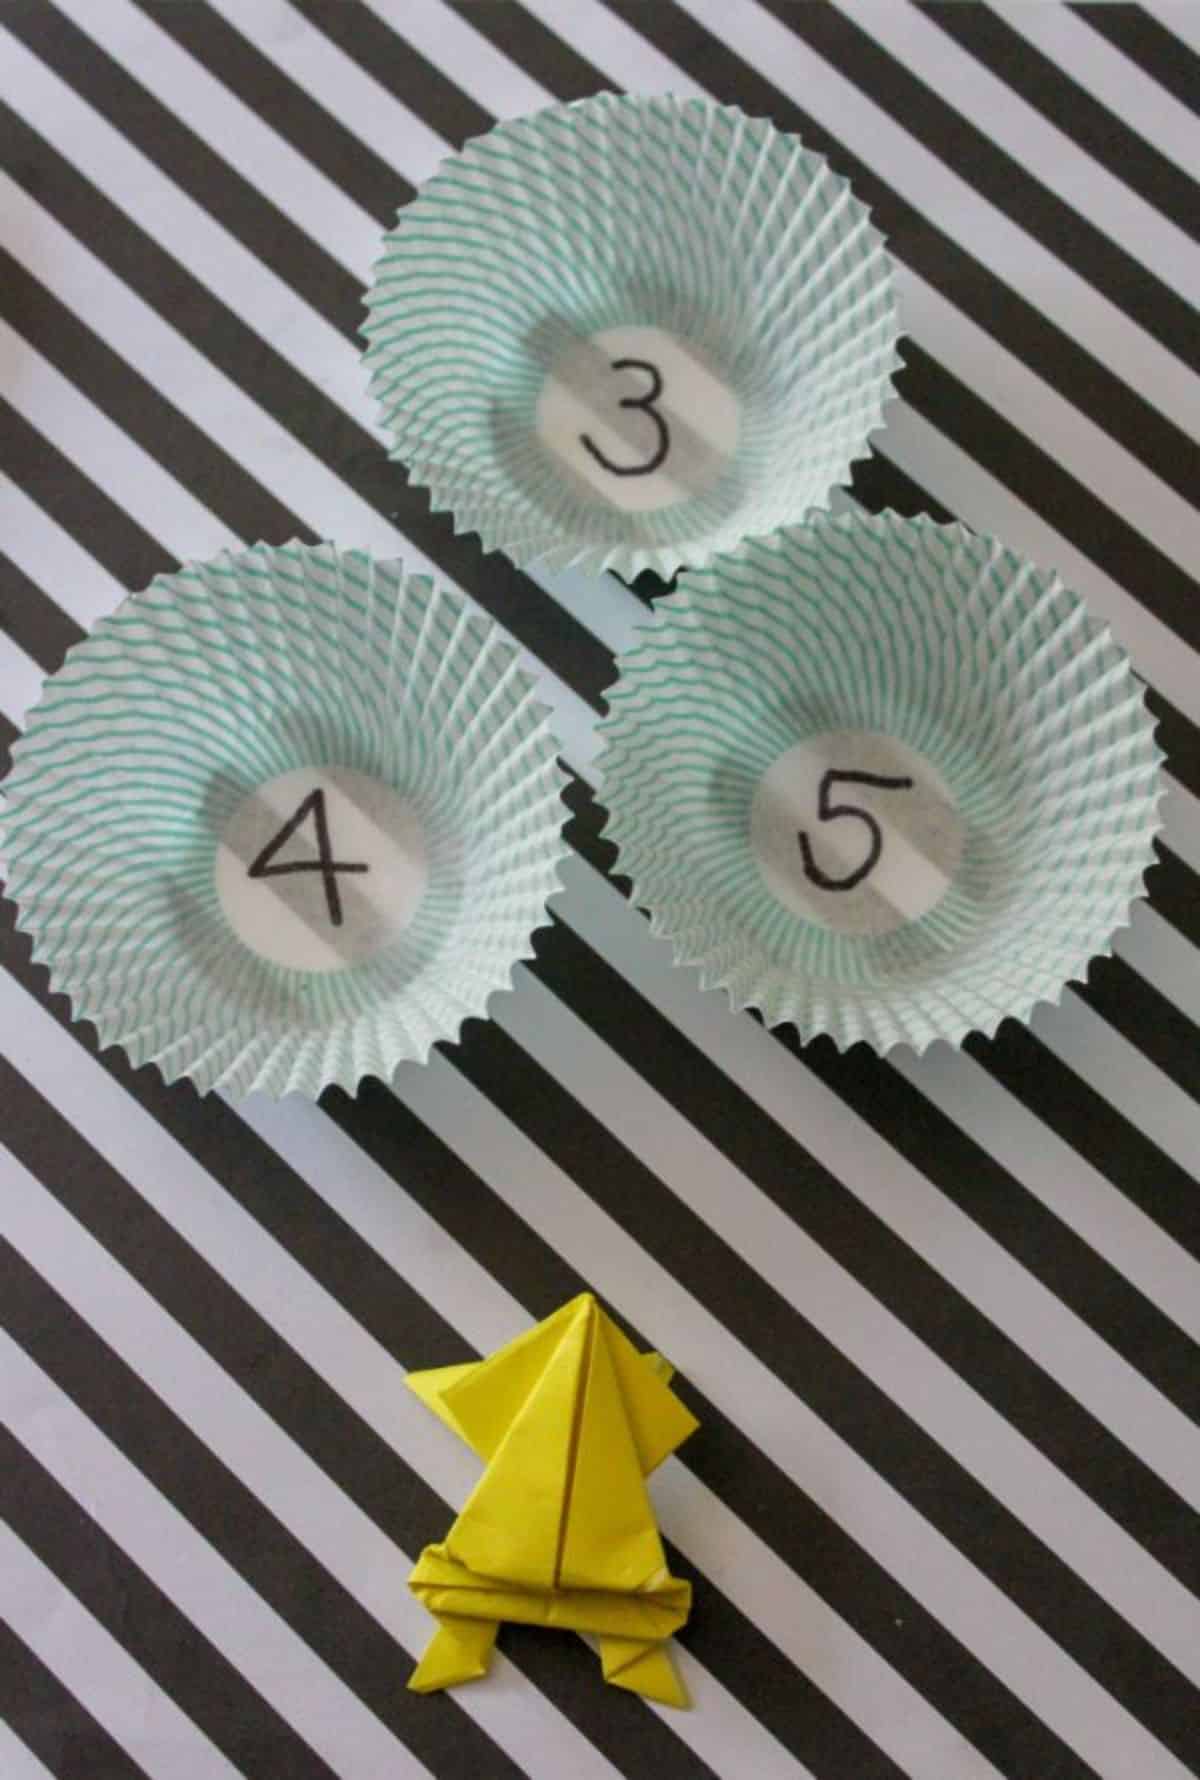 origami jumping frog and cupcake liners to jump into on a black and white striped background.